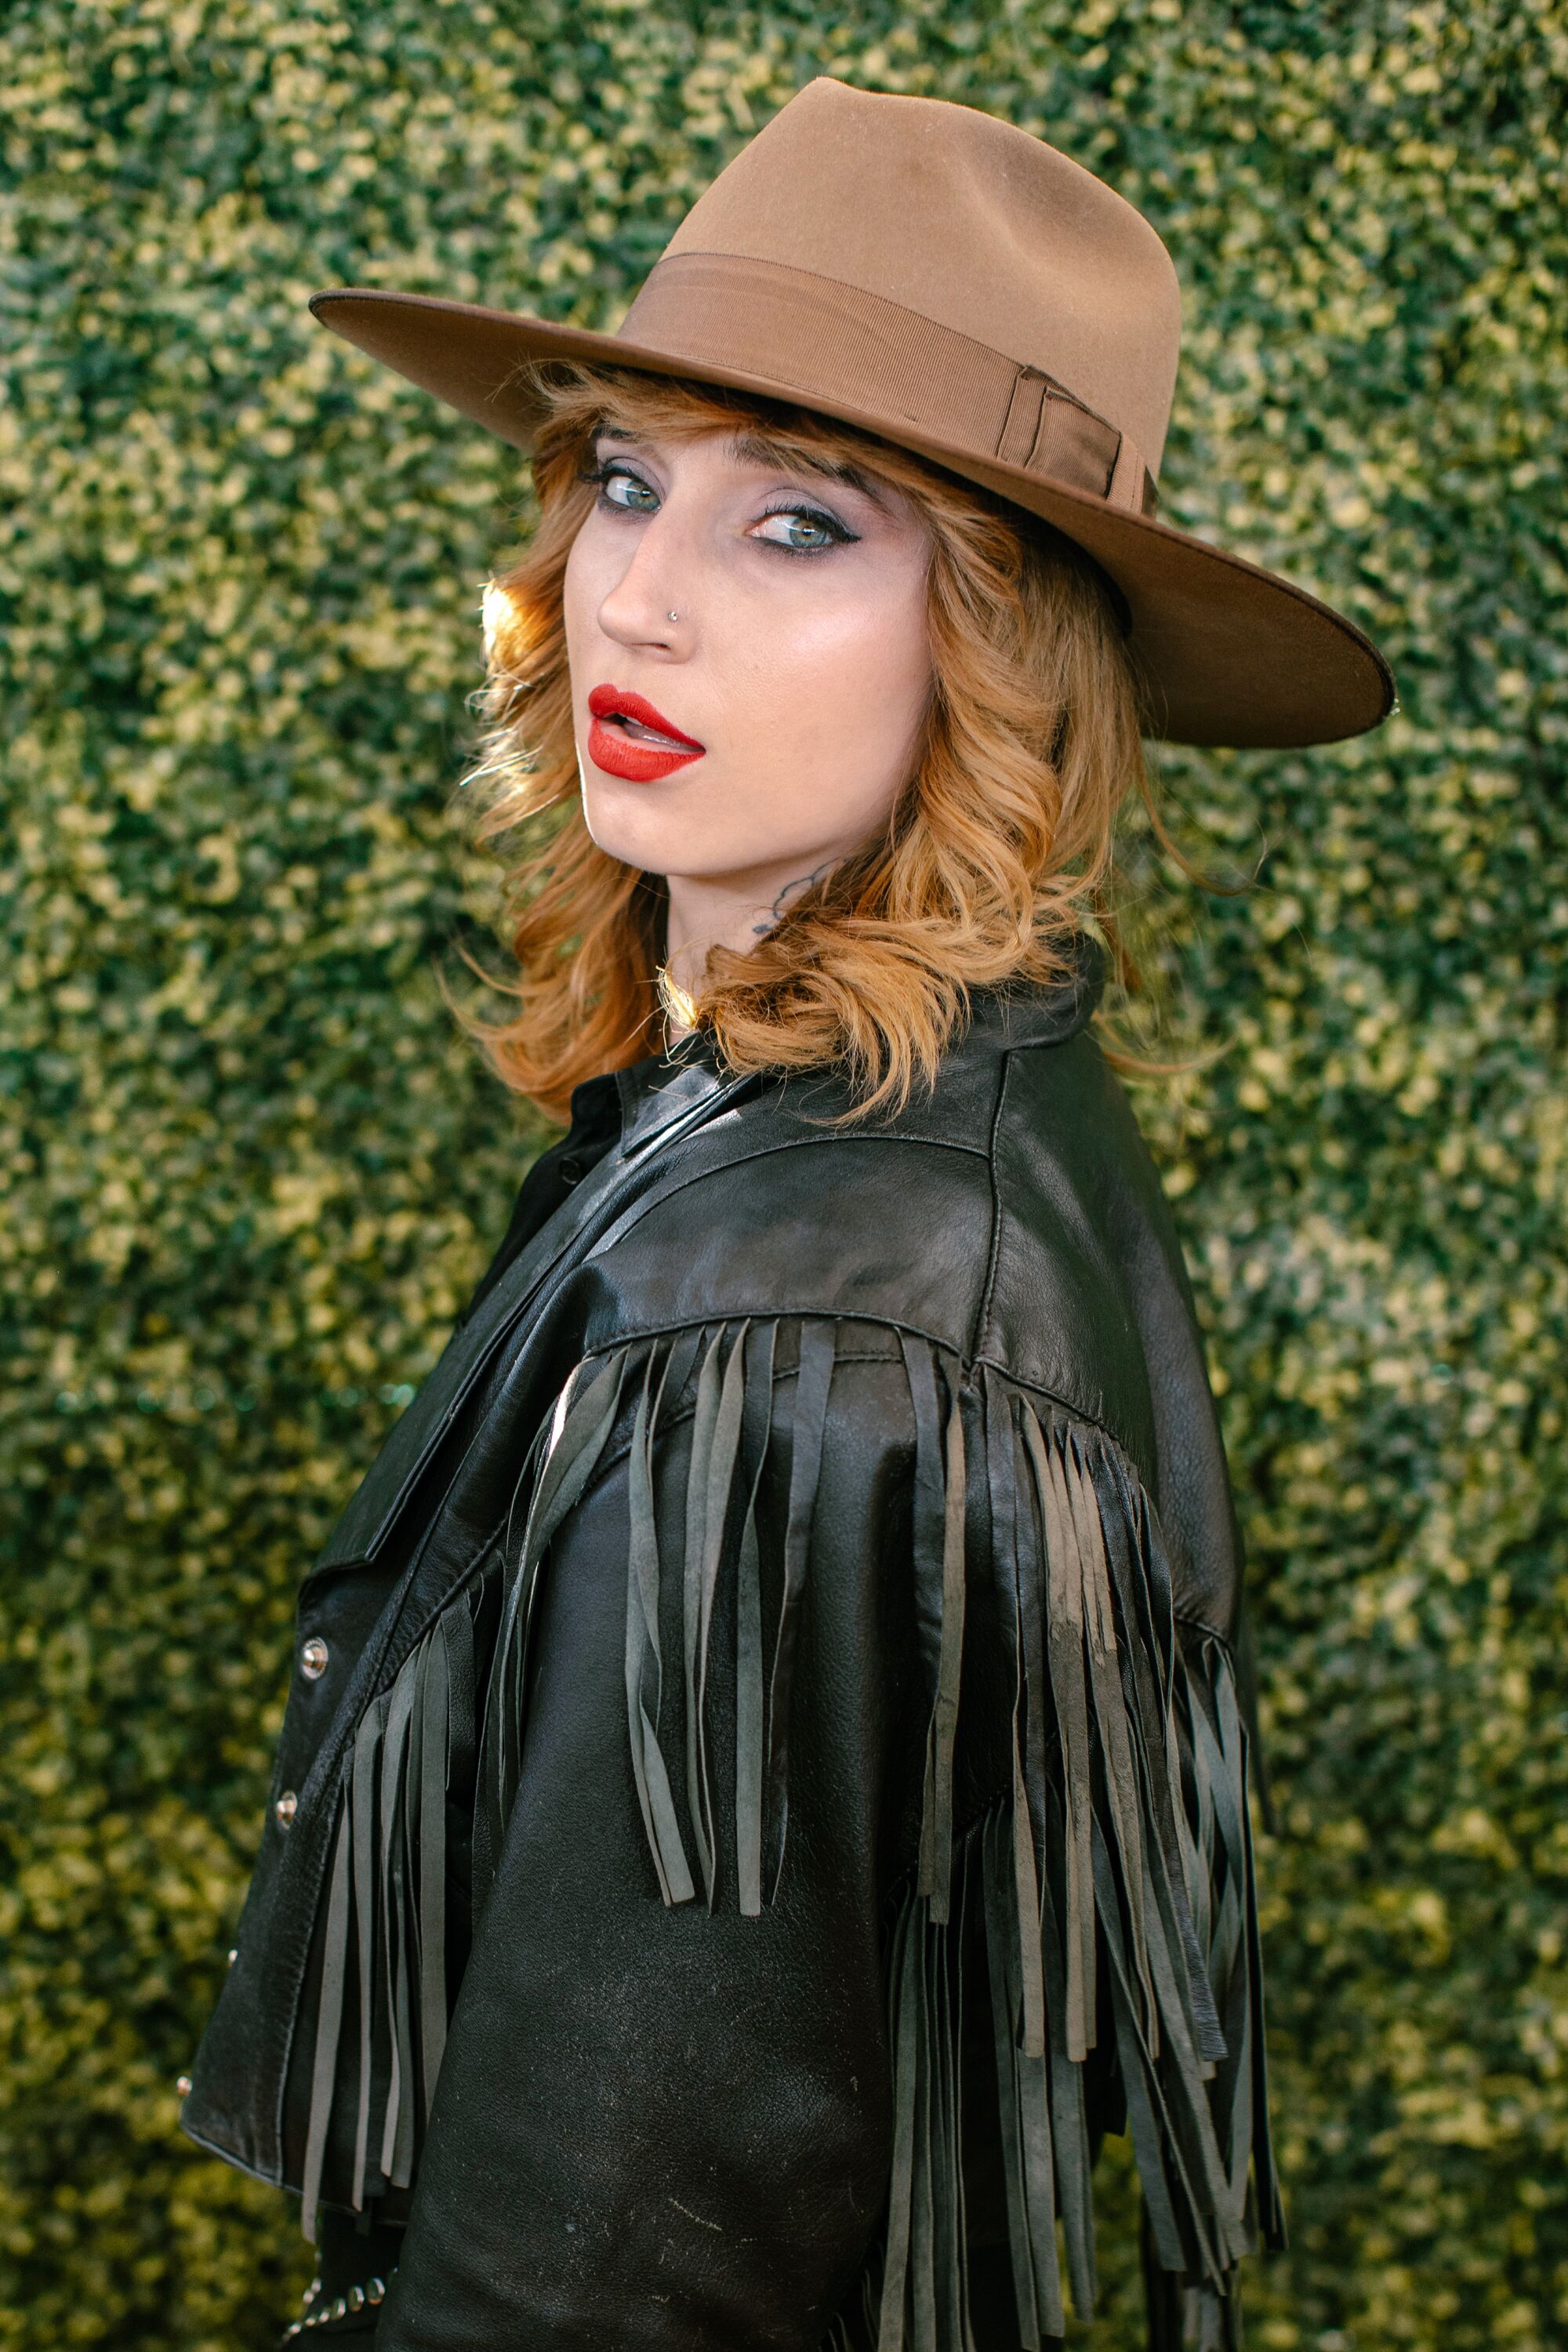 A red-haired woman in a black fringed jacket and a brown hat.